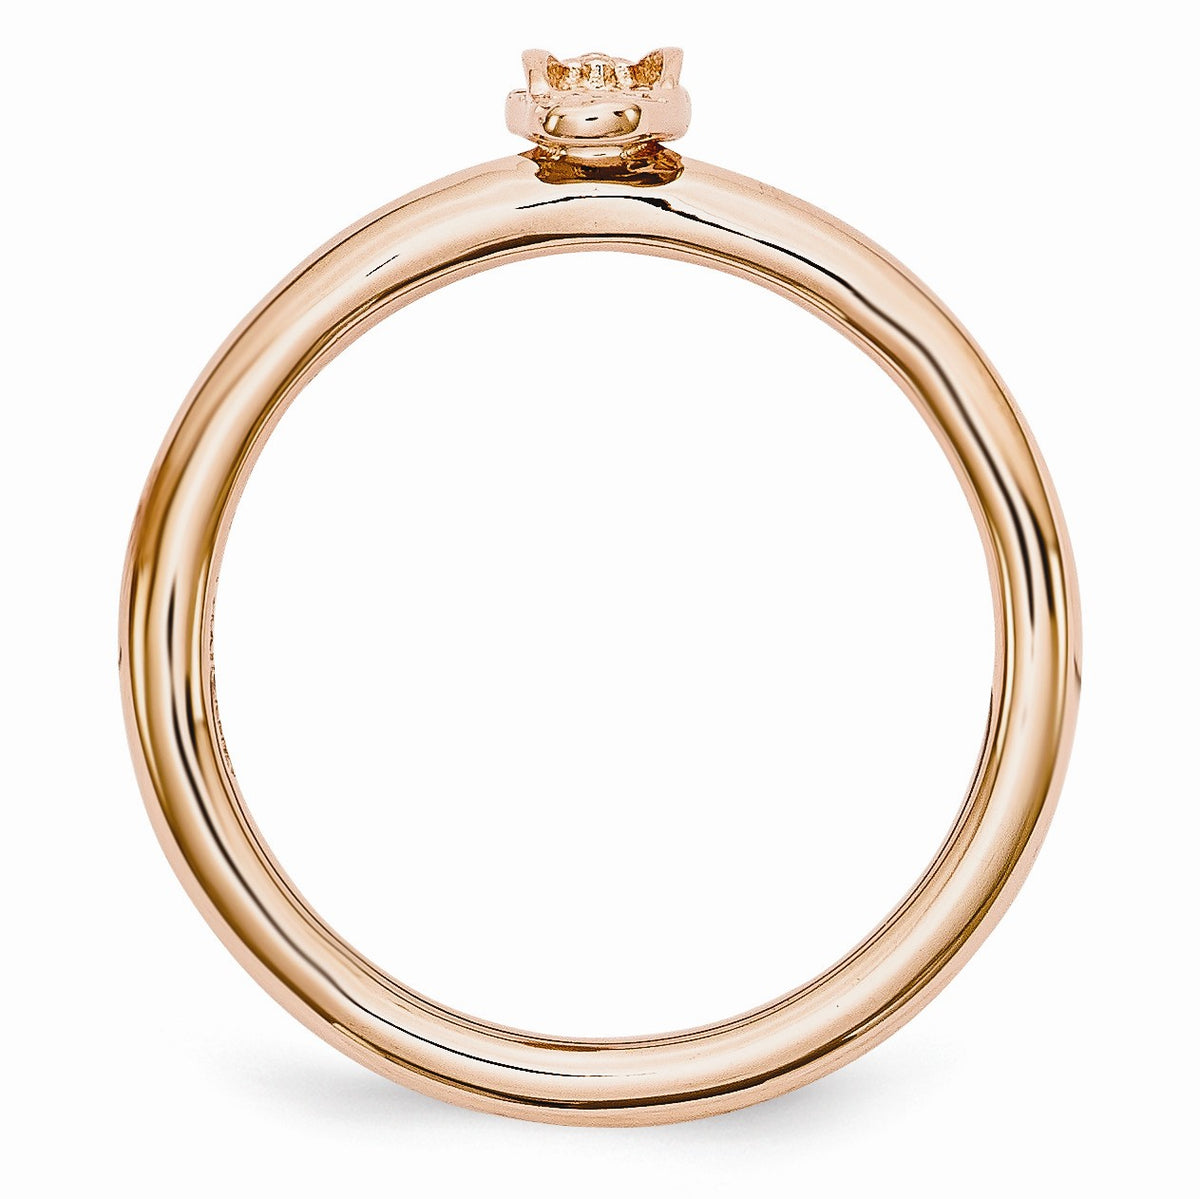 Alternate view of the Rose Gold Tone Plated Sterling Silver Stackable 7.5mm Flip Flop Ring by The Black Bow Jewelry Co.